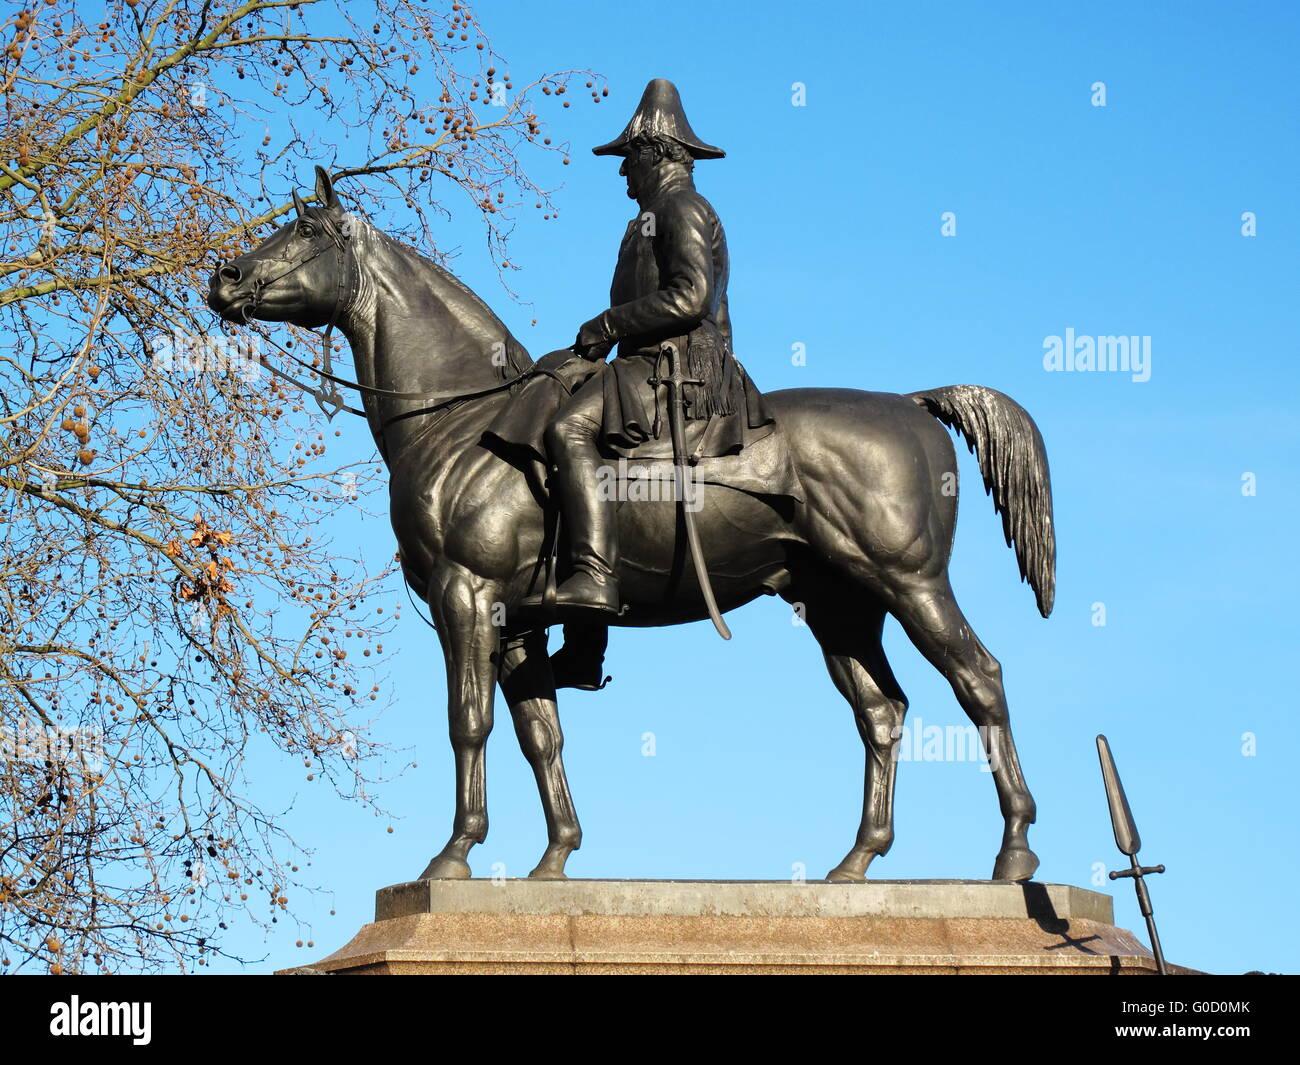 The Victorian bronze equestrian statue of the Duke of Wellington on his horse Copenhagen stands at Hyde Park Corner, London, England, UK. Stock Photo